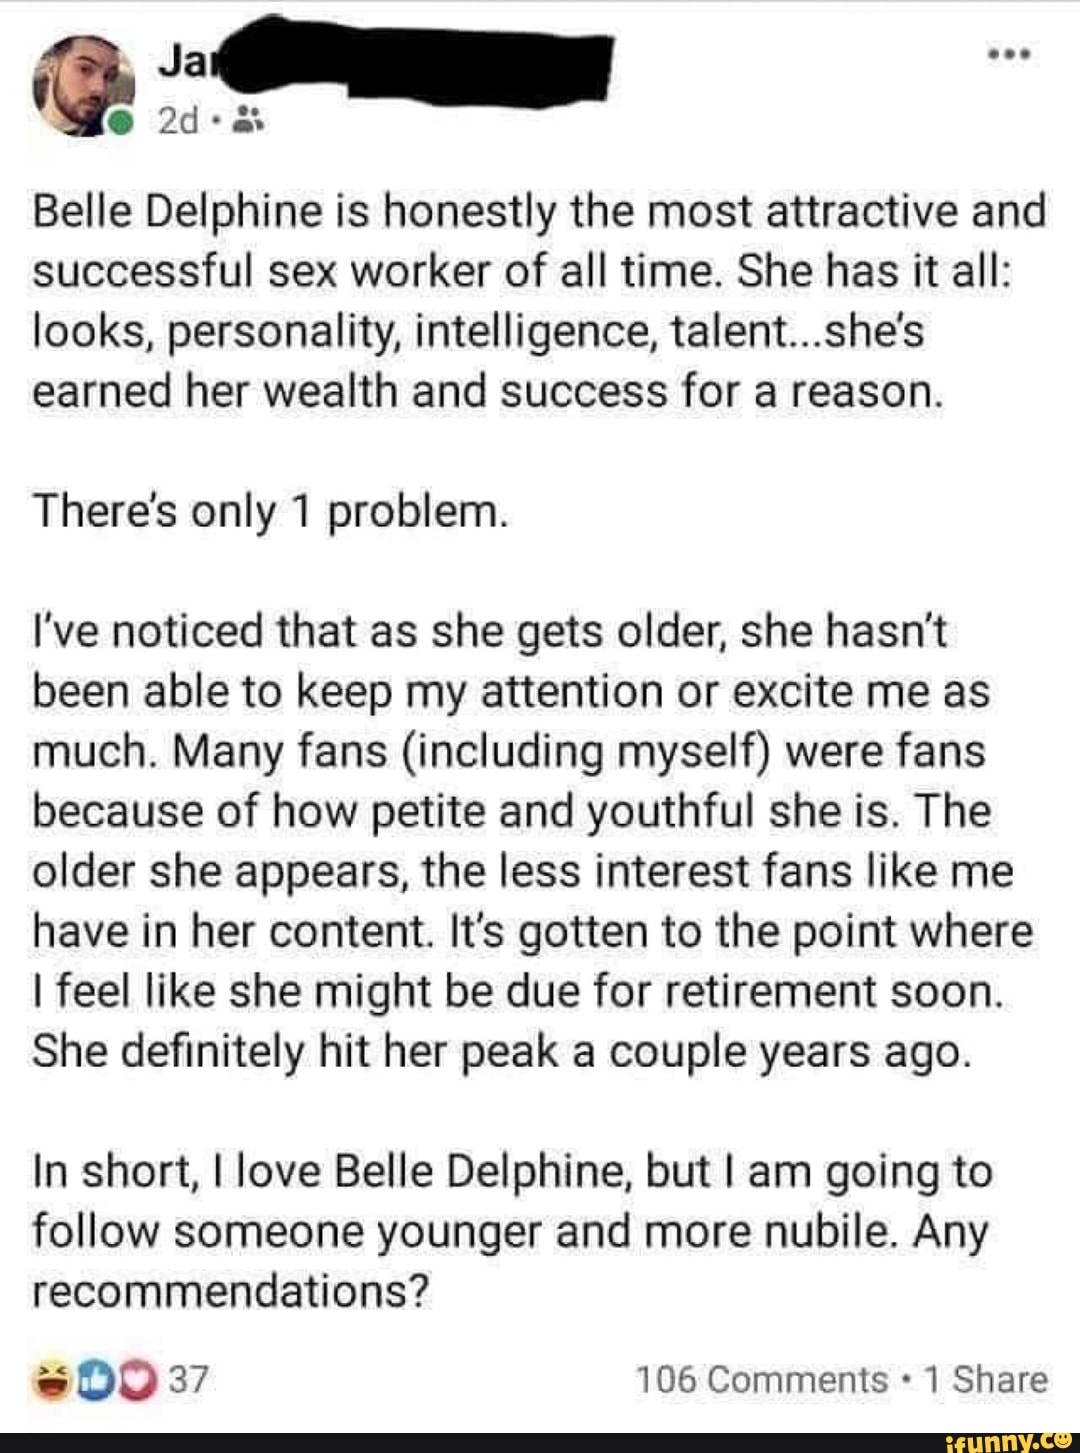 Di) I'M DOING PORN - belle delphine de dez. de 2020 35 MIL 924 We will  watch your career with great interest. - iFunny Brazil